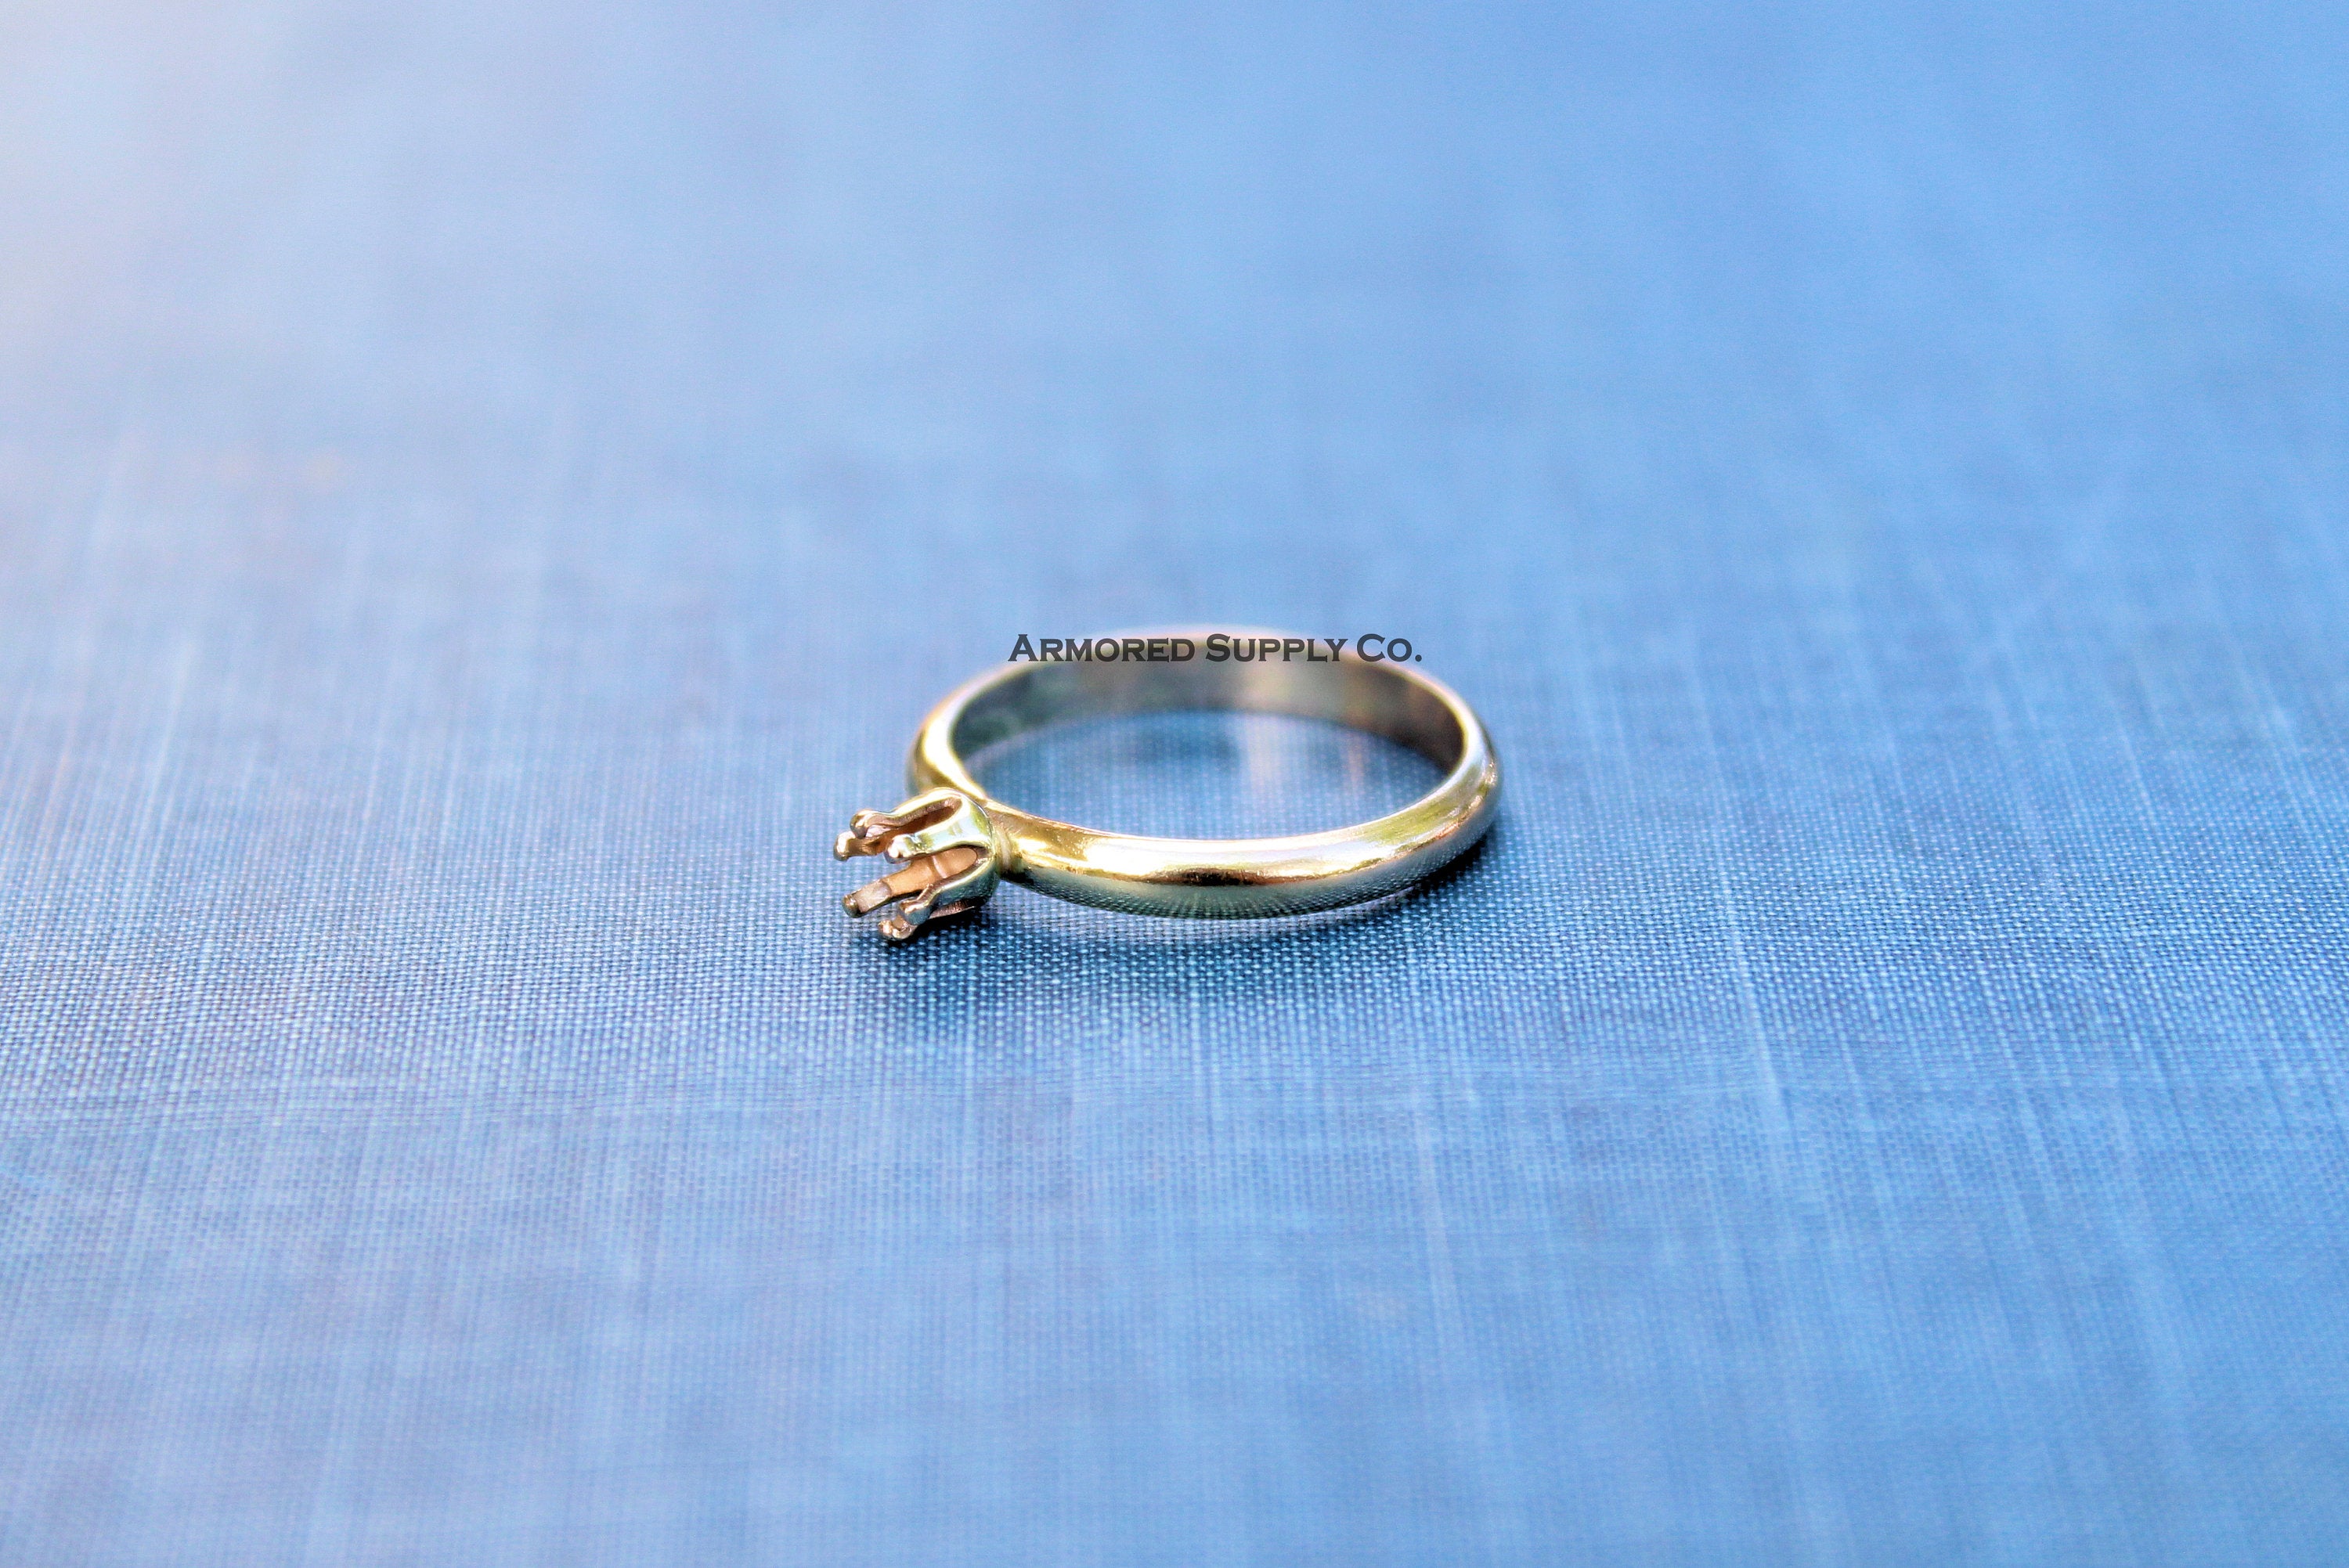 Gold Filled 5mm Snap In Bezel Ring blank,Half Round Ring Band, Breast Milk DIY ring, DIY jewelry supplies, wholesale jewelry, diy ring blank